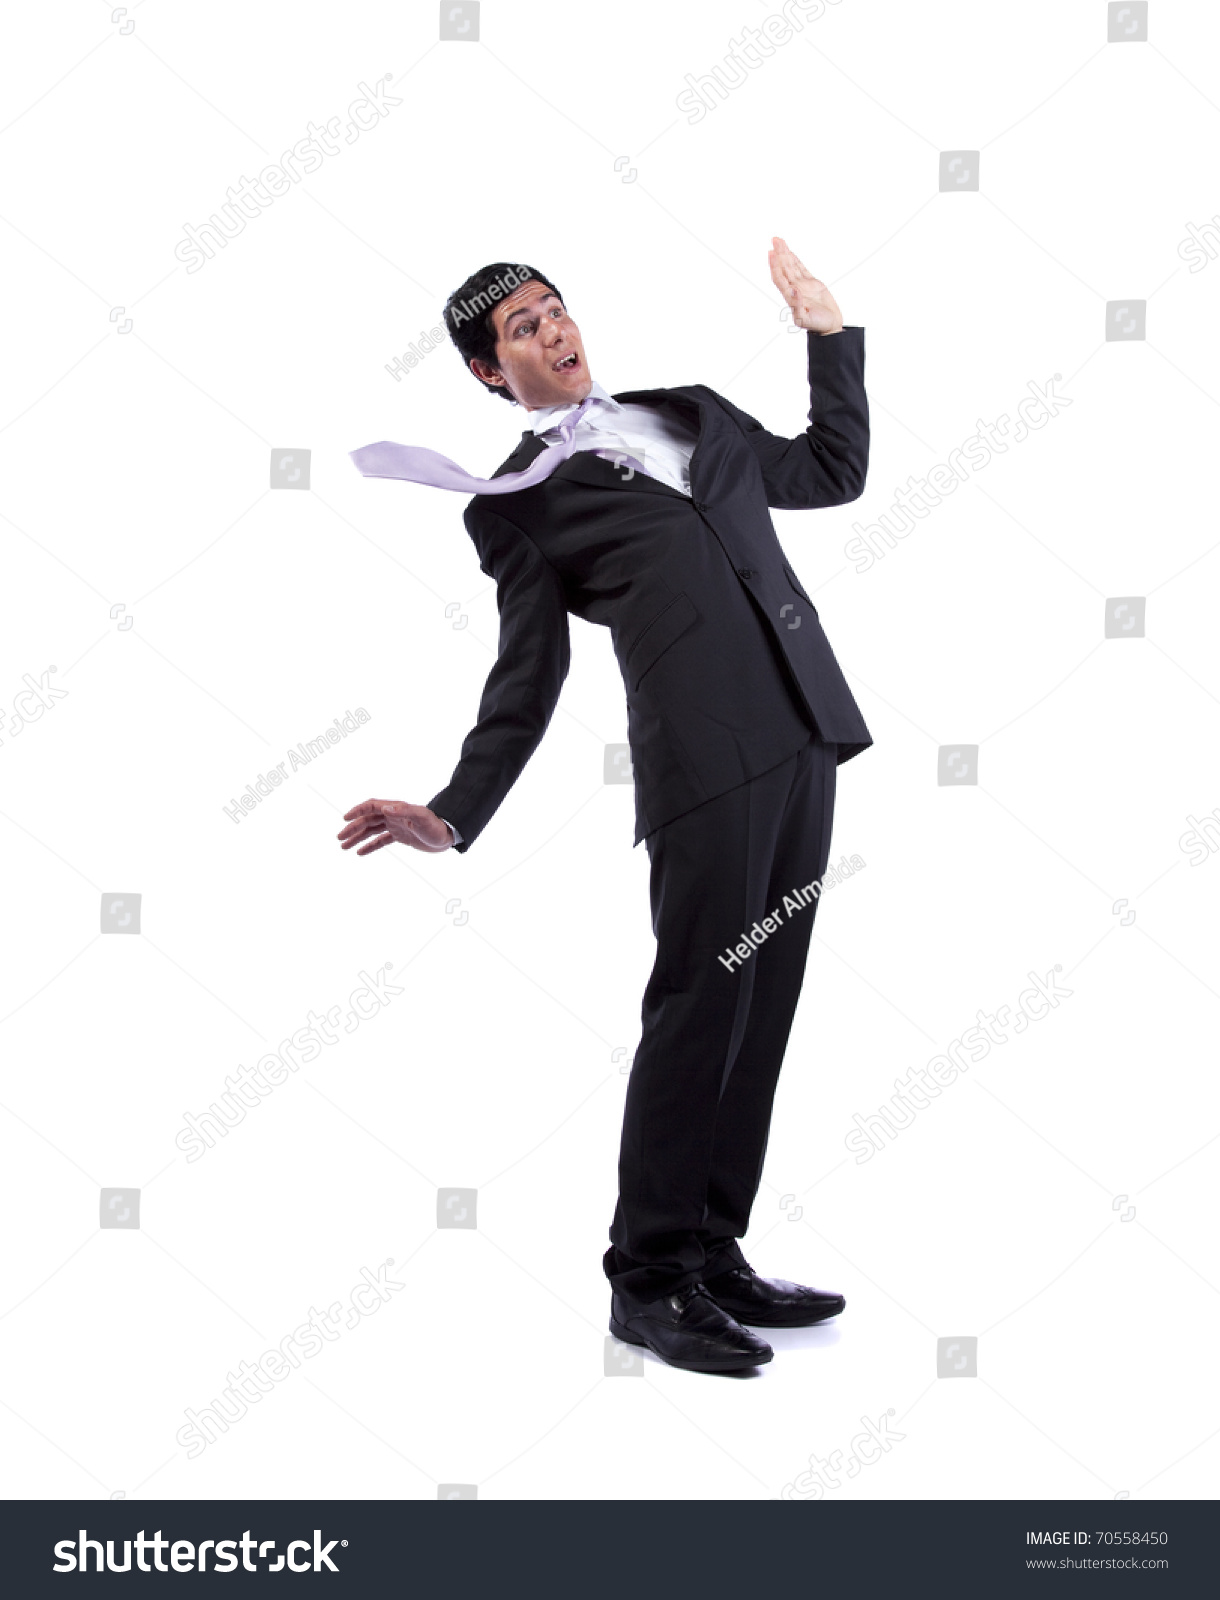 Scared Businessman In A Falling Position (Isolated On White) Stock ...